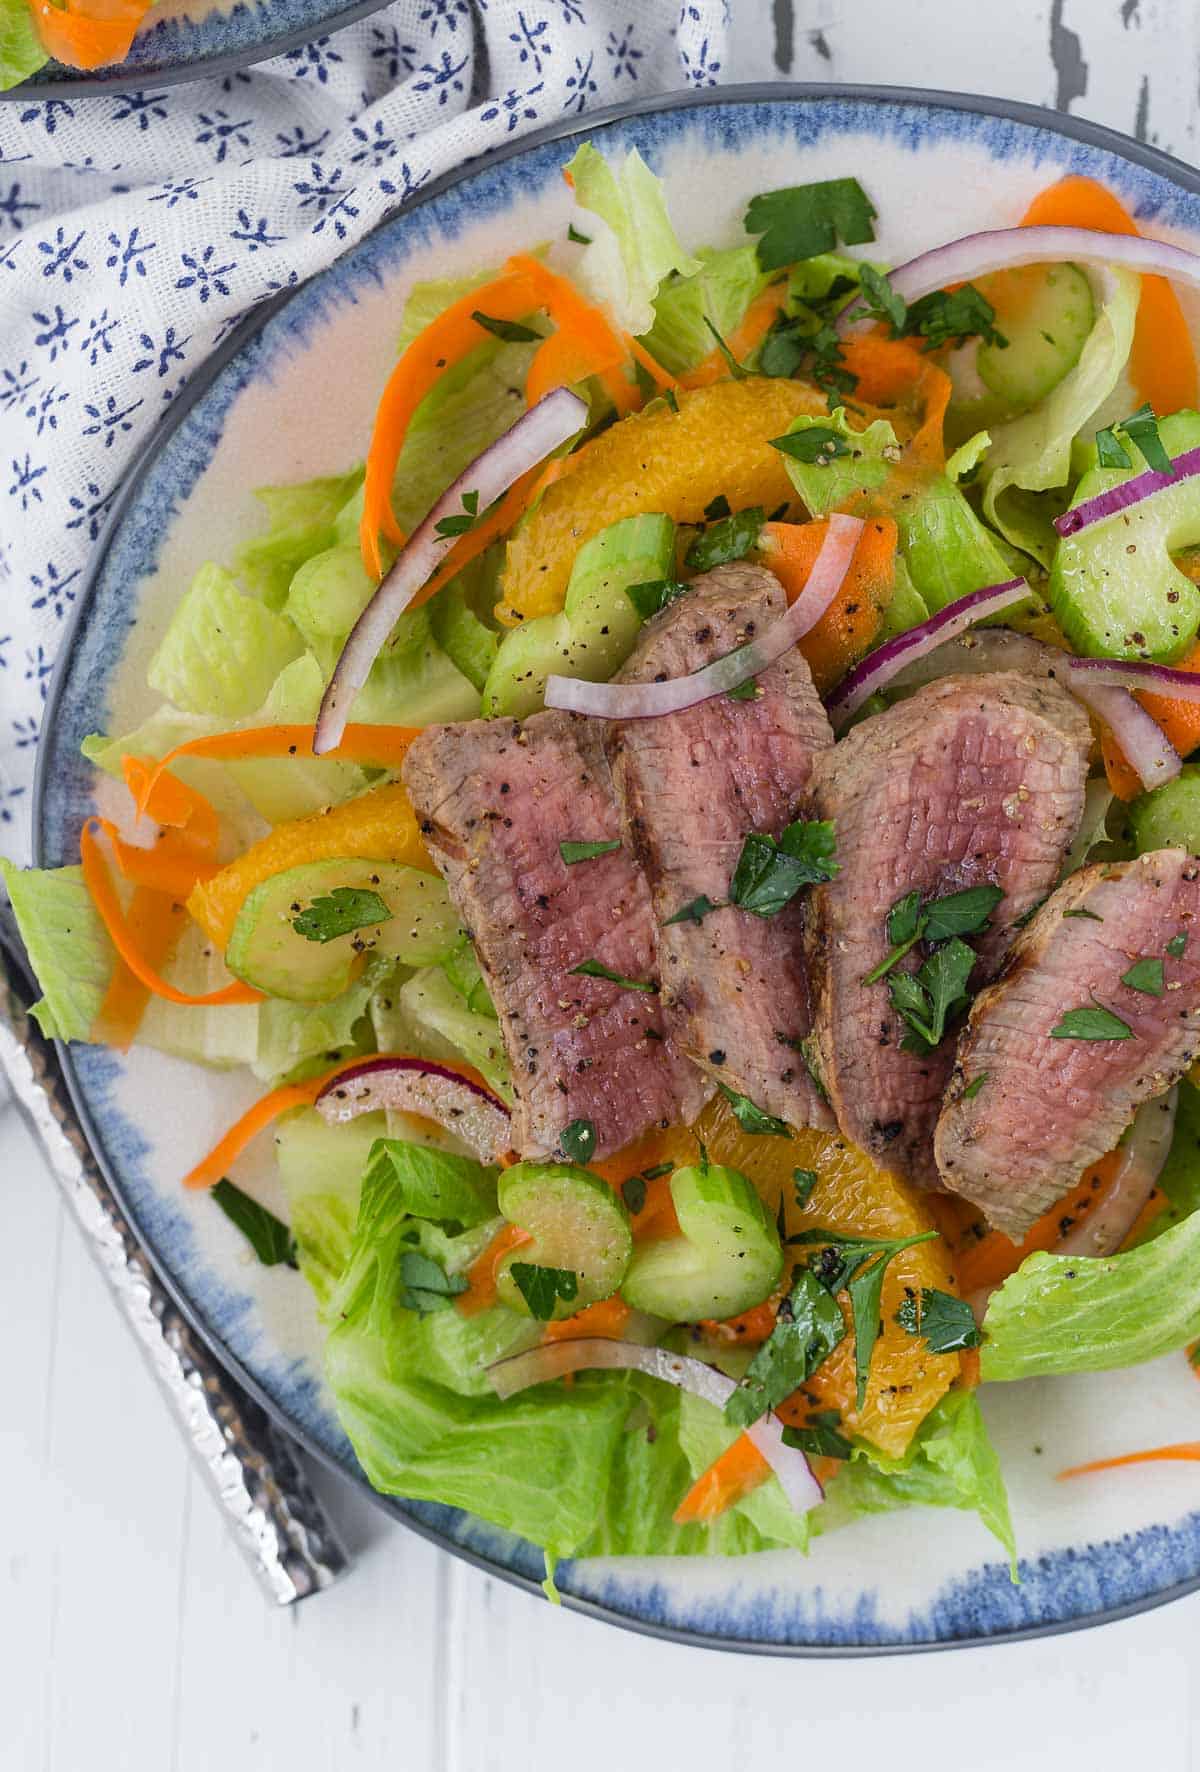 Overhead view of a green leaf lettuce salad topped with steak, oranges, and onion.